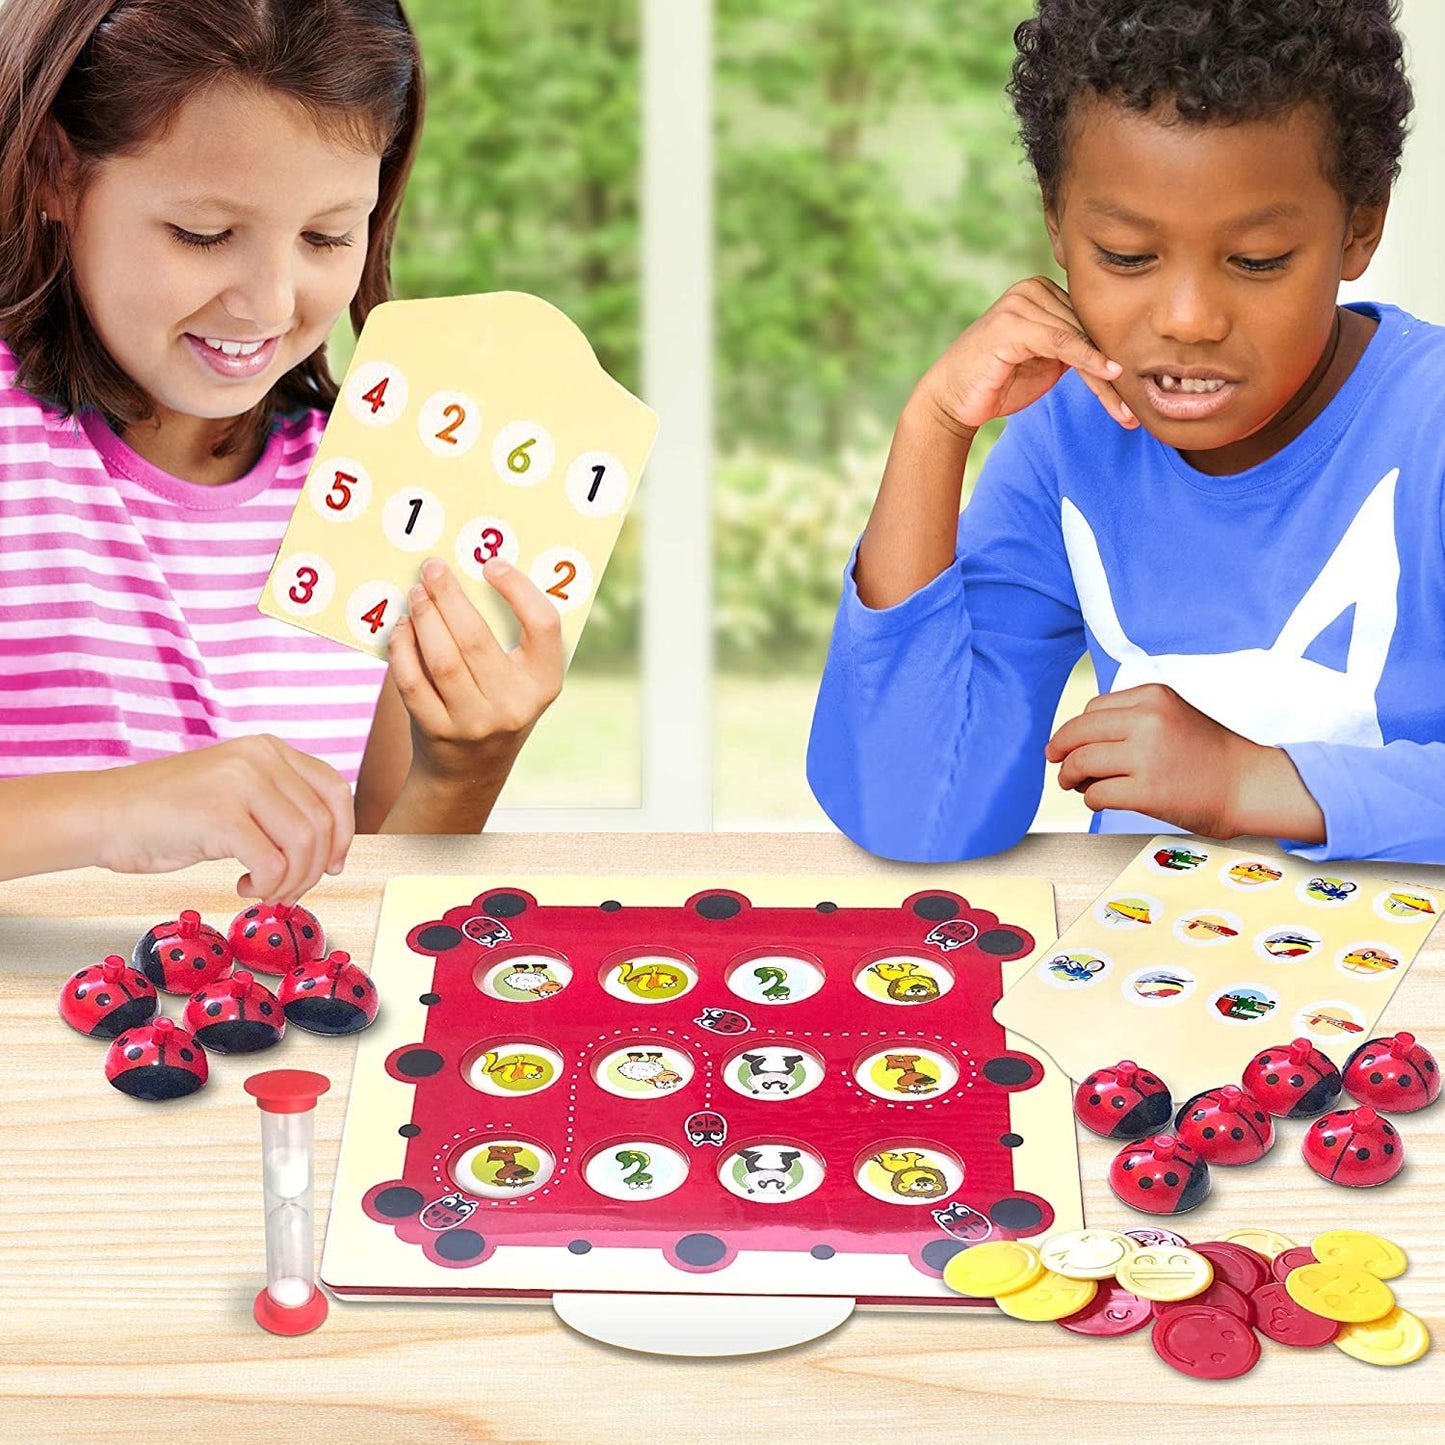 Gamie Ladybug Memory Matching Game for Kids - Fun Educational Learning Toy with 8 Match Games - Teaches Memory, Alphabets, Numbers, Colors and More - for Boys, Girls, Preschoolers